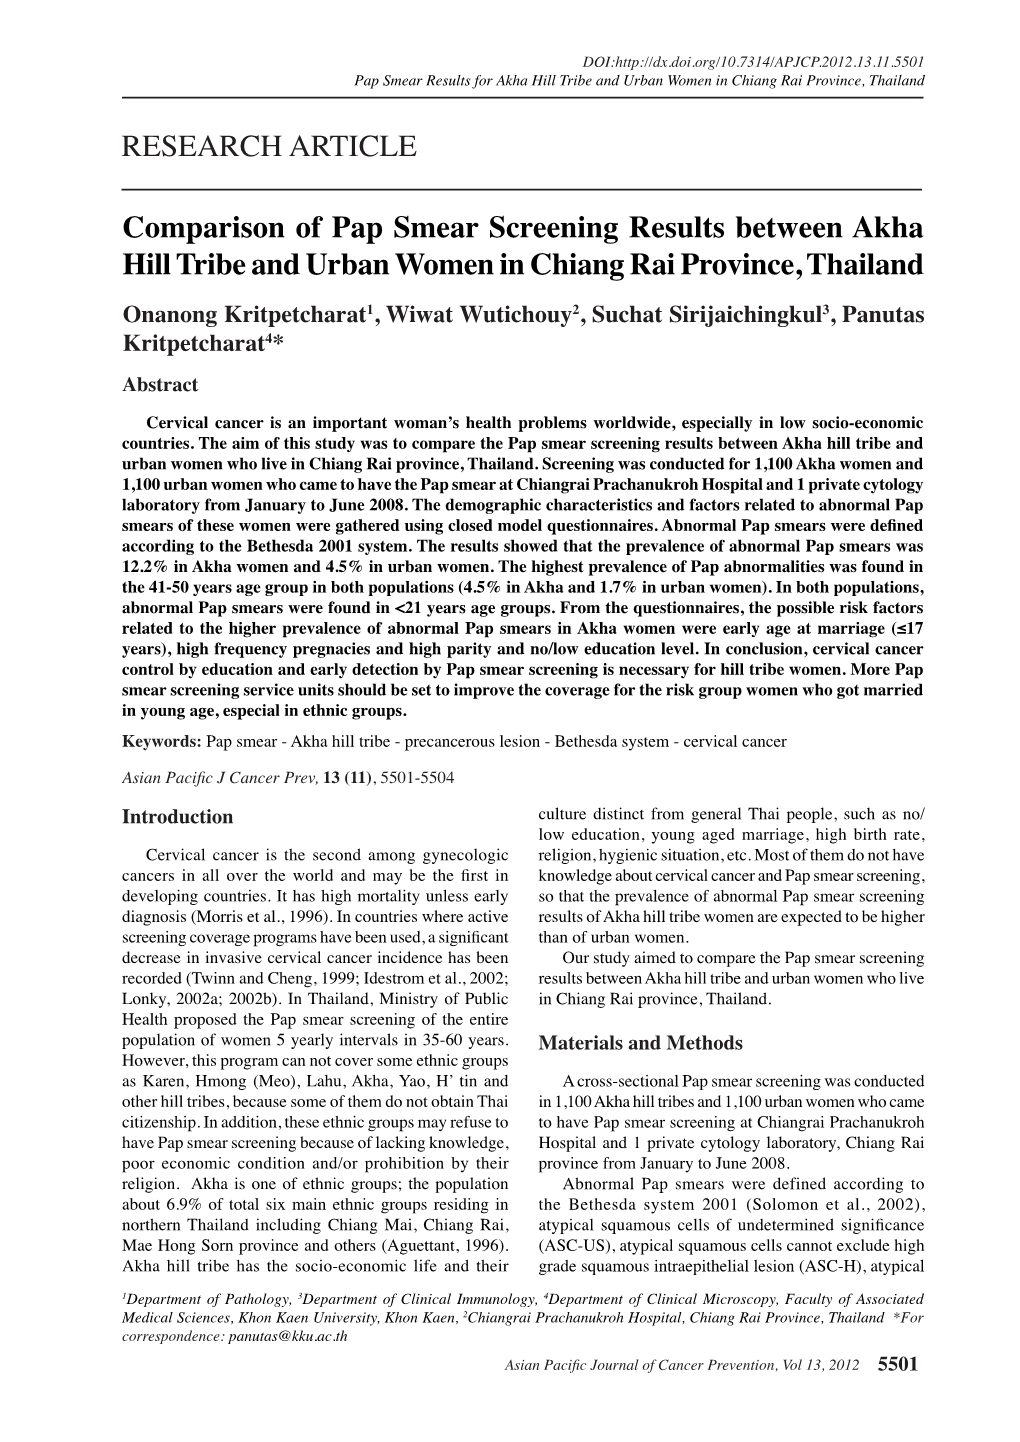 Comparison of Pap Smear Screening Results Between Akha Hill Tribe